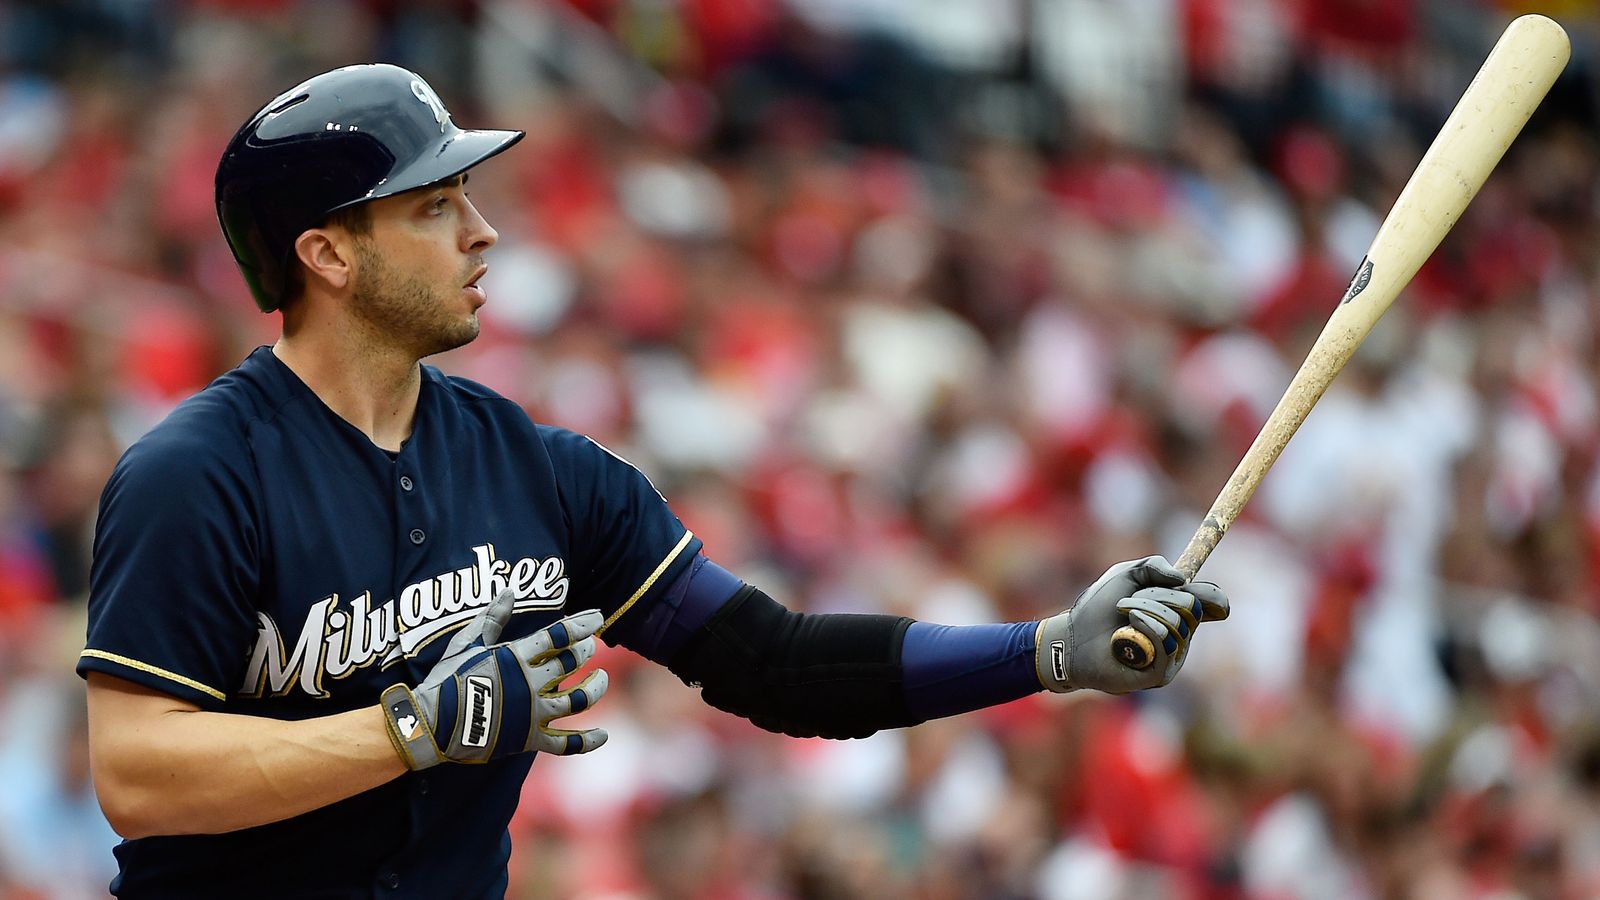 David Stearns: Ryan Braun is ‘going to be a Brewer for a very long time”